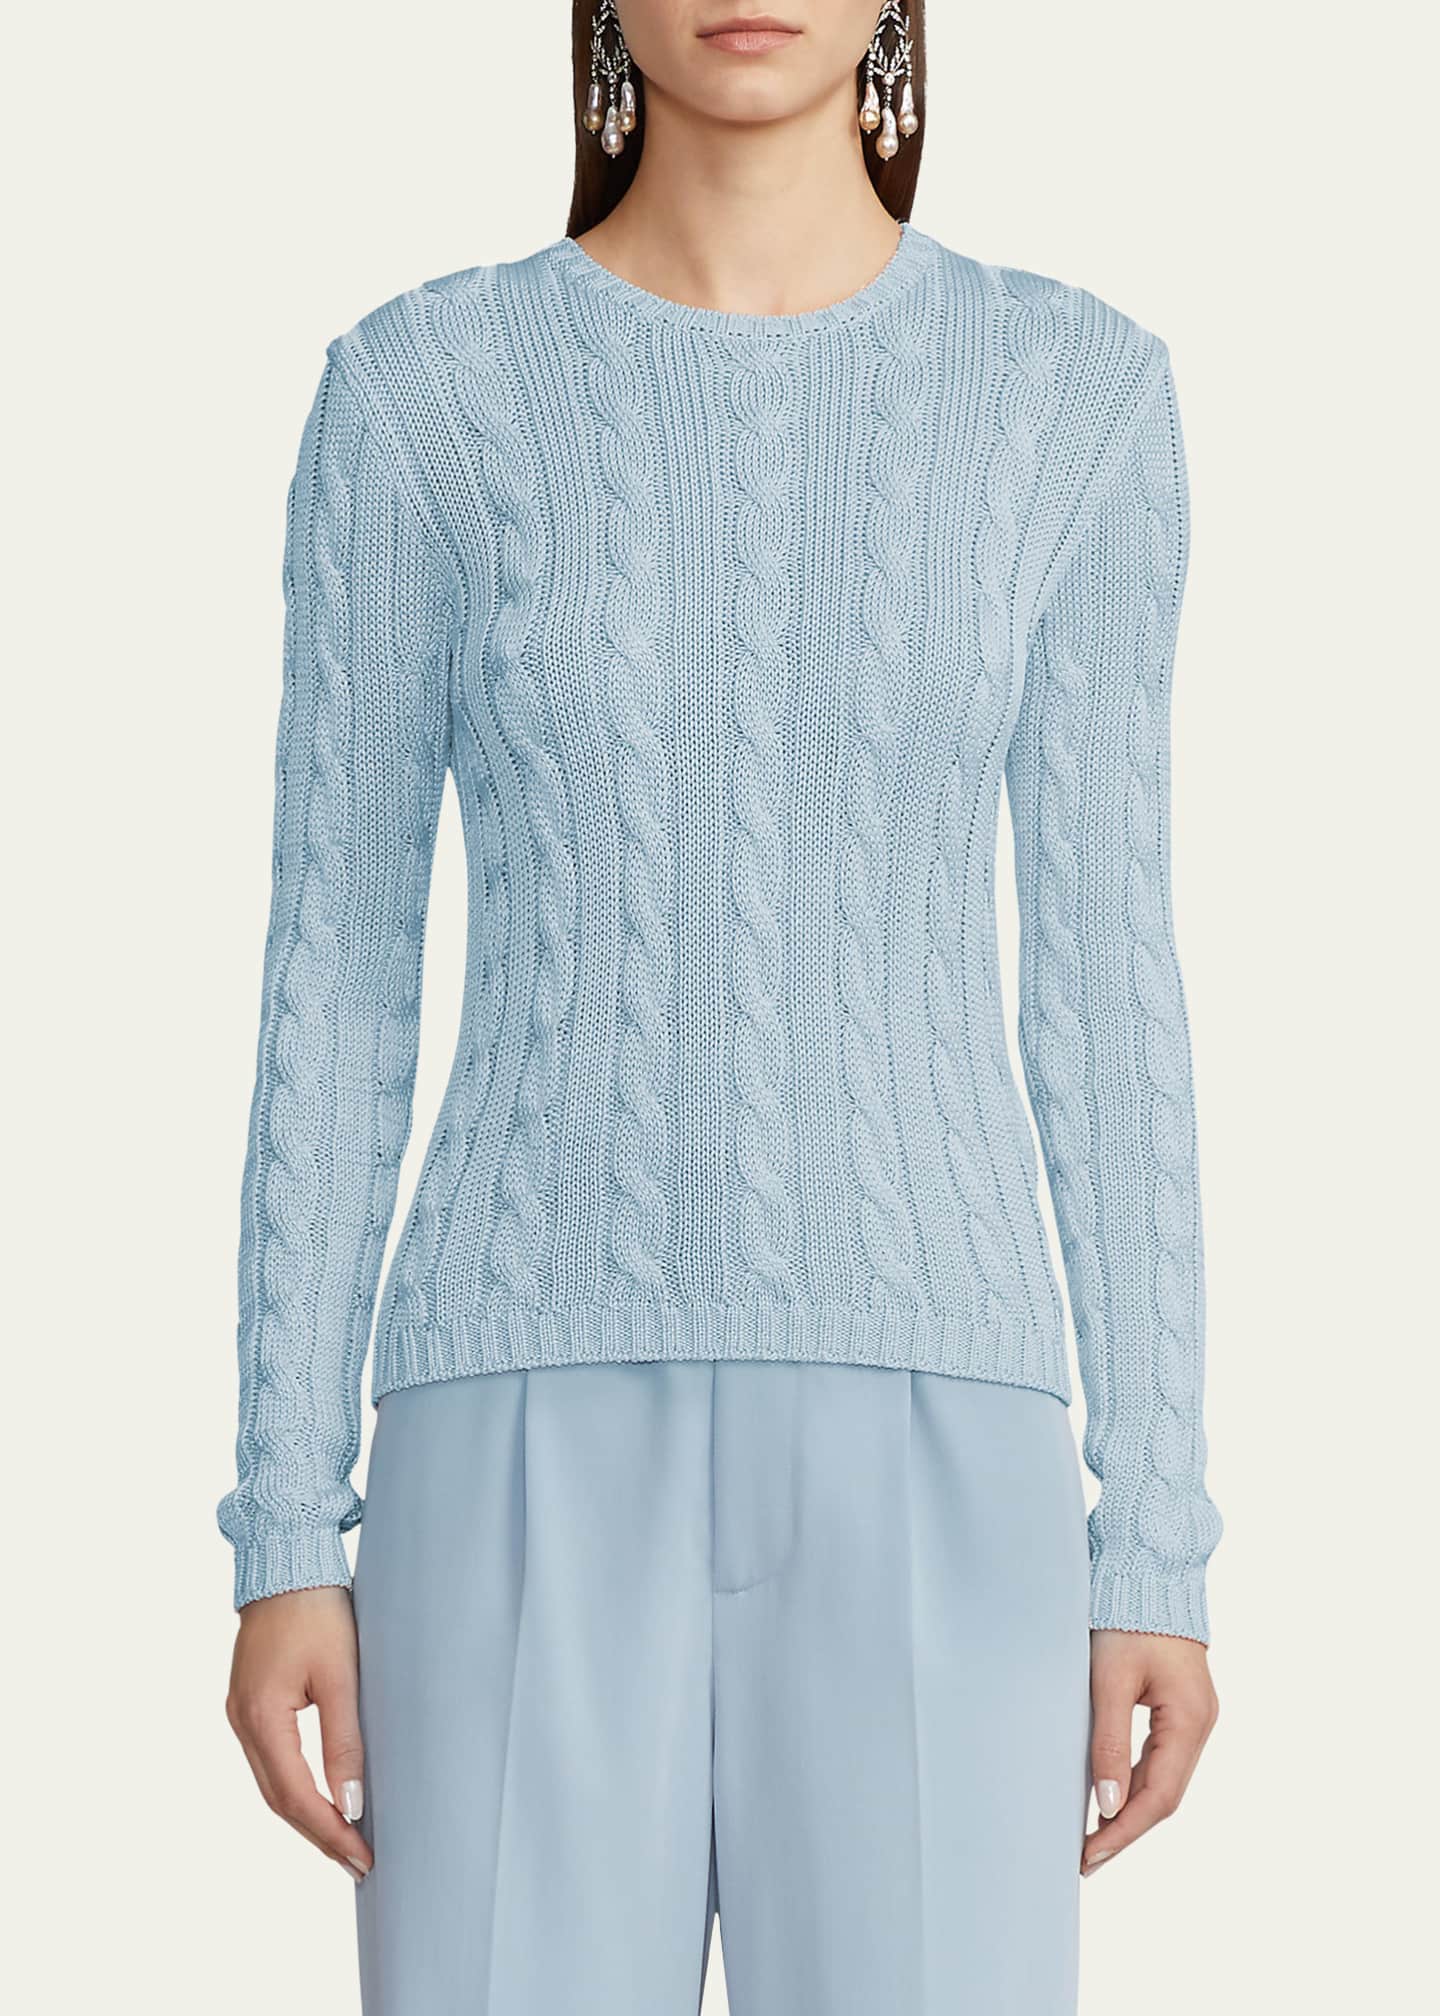 Ralph Lauren Collection High Shine Silk Cable-Knit Sweater, Blue, Women's, M, Sweaters Cable-Knit Sweaters